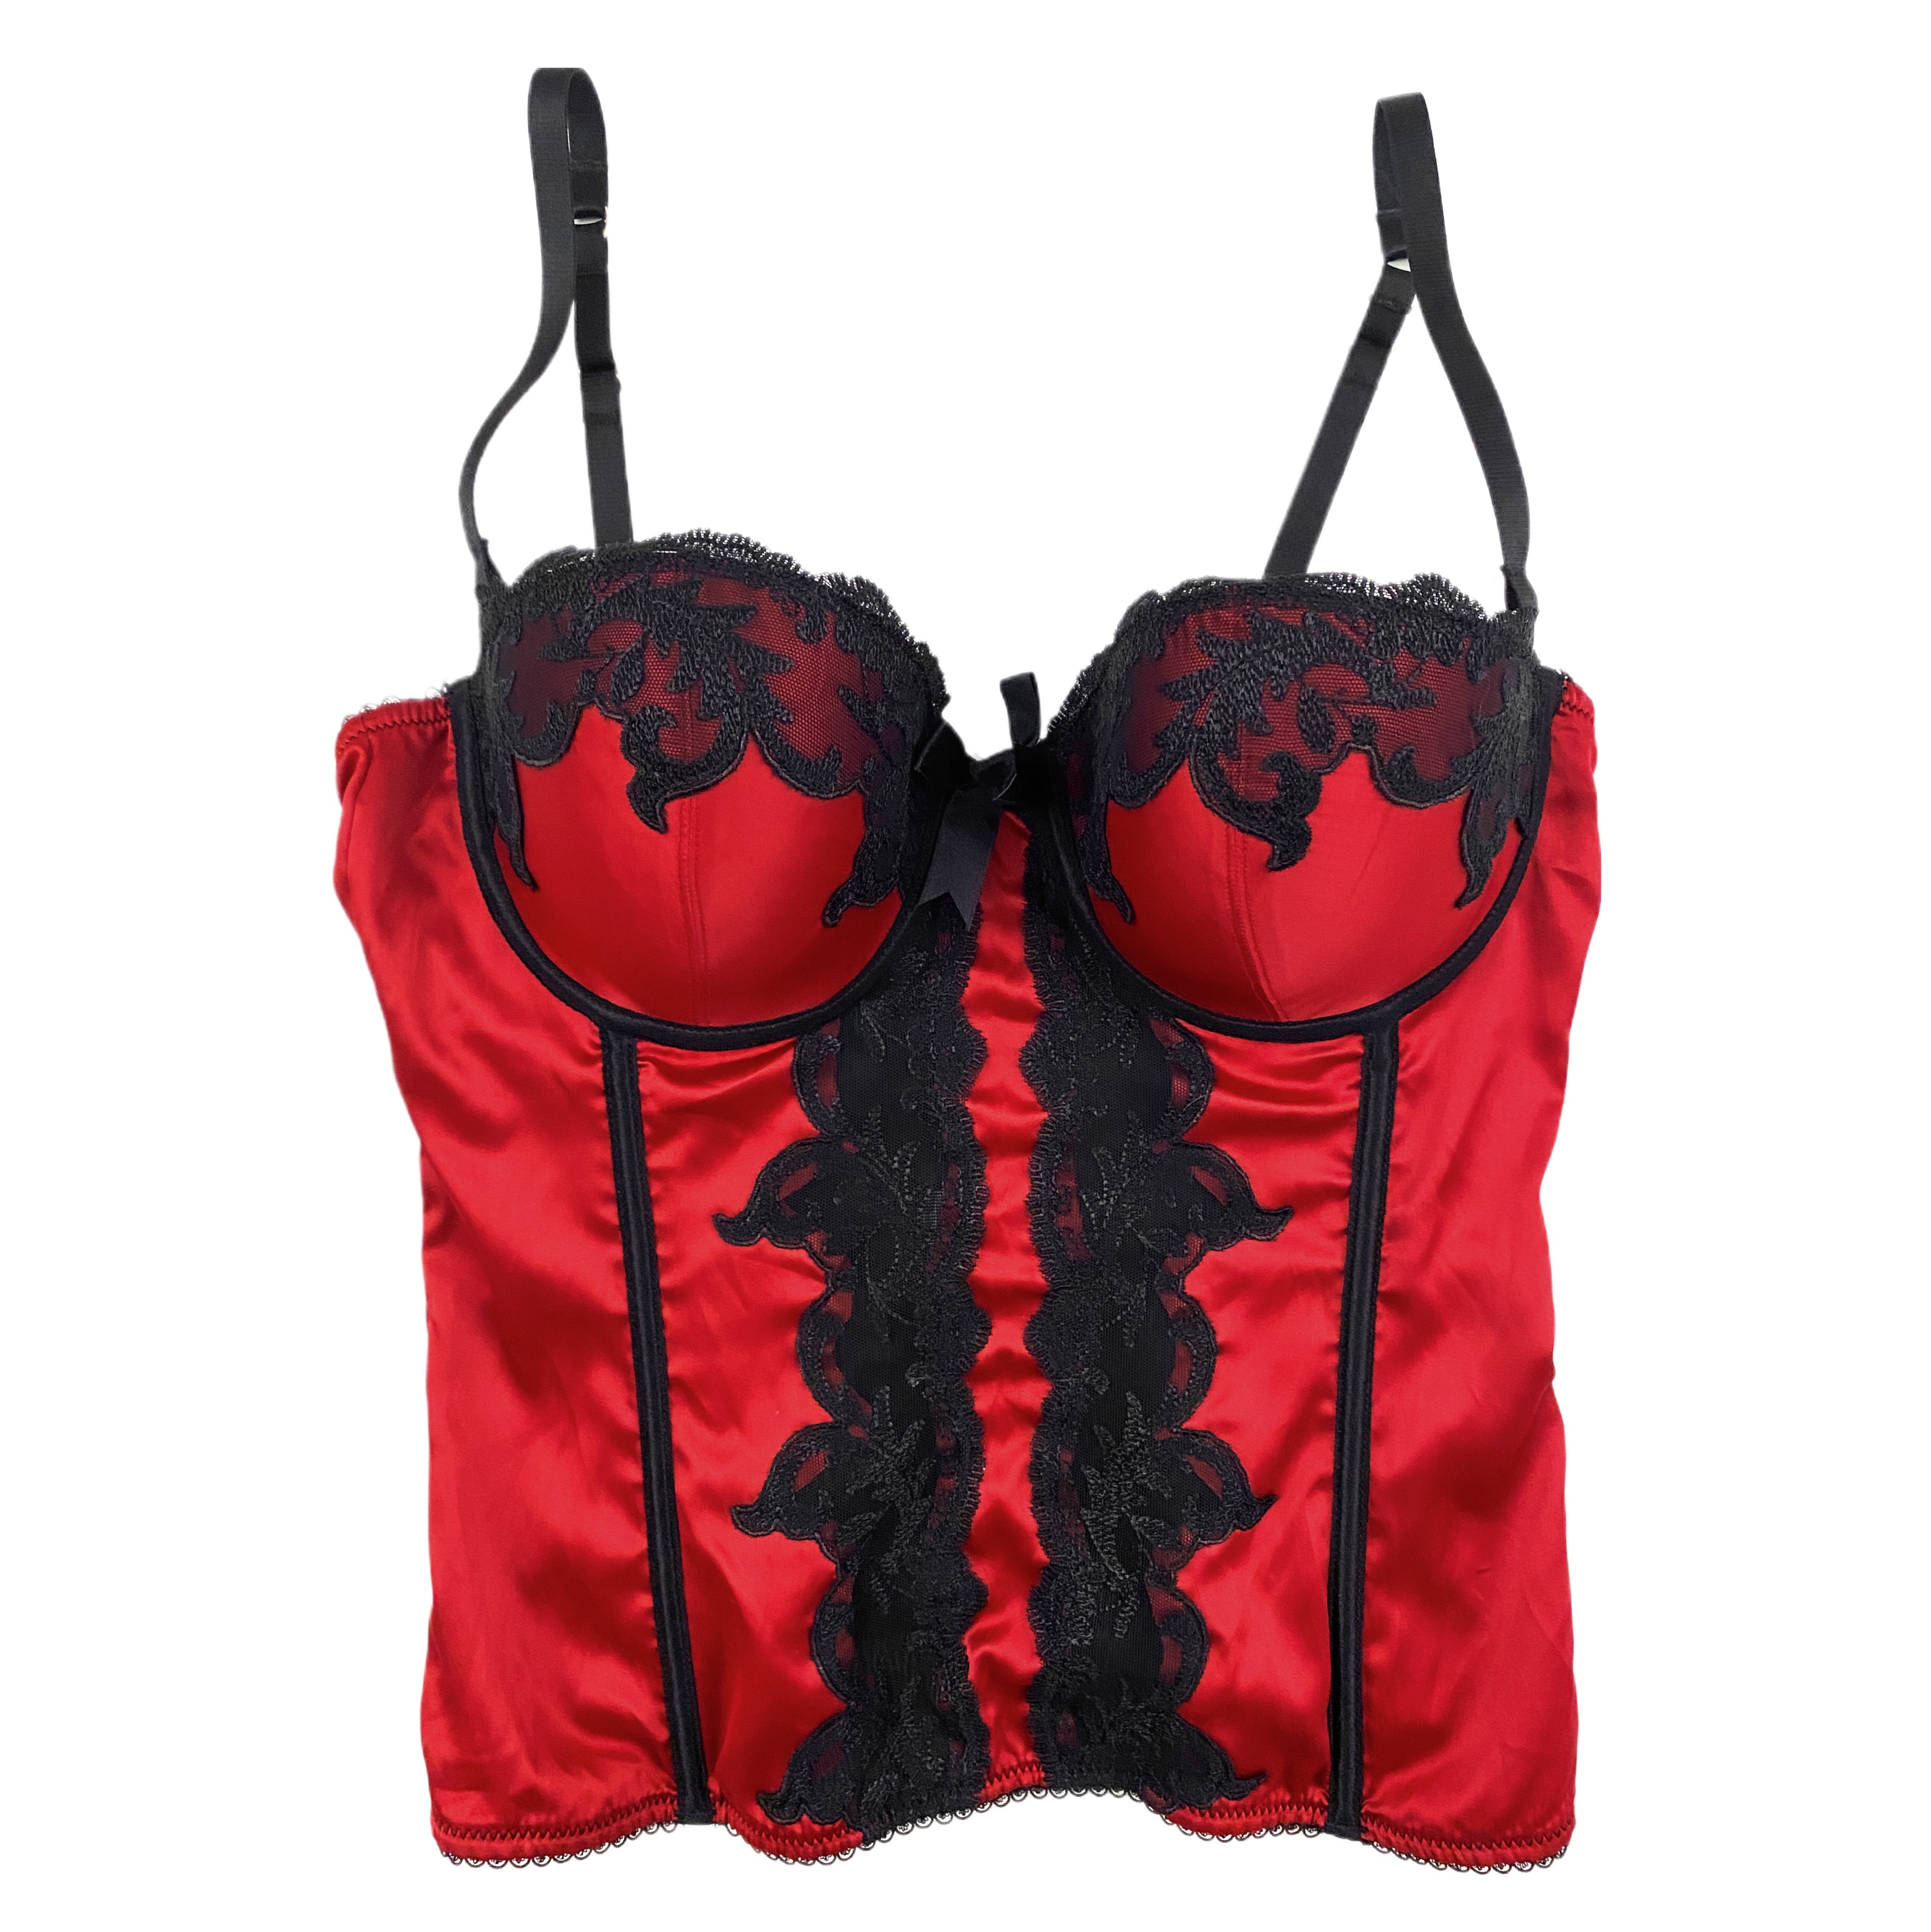 Red Satin and Lace Bustier (M)